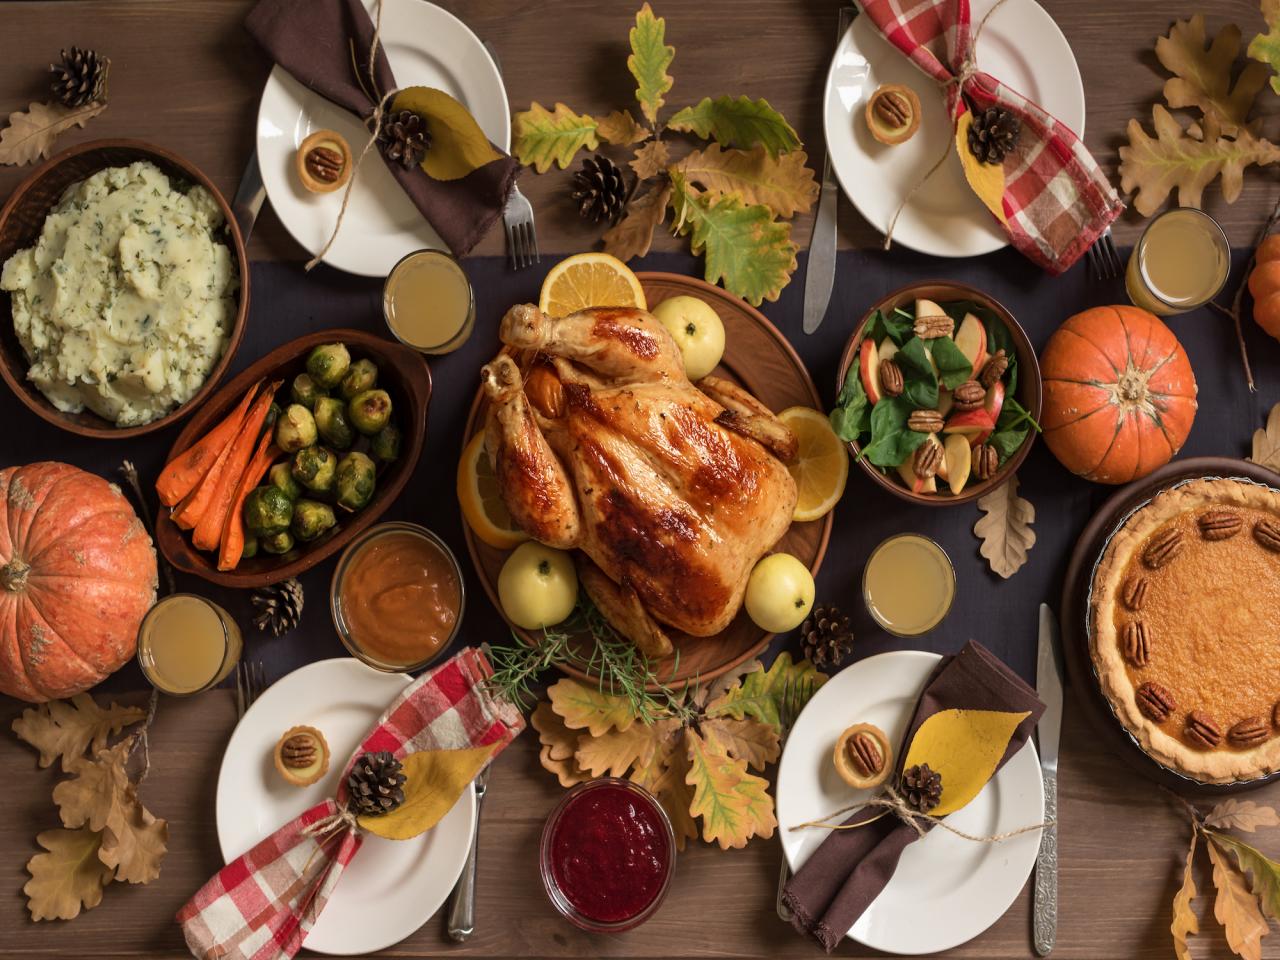 11-cheap-things-to-bring-to-friendsgiving-fn-dish-behind-the-scenes